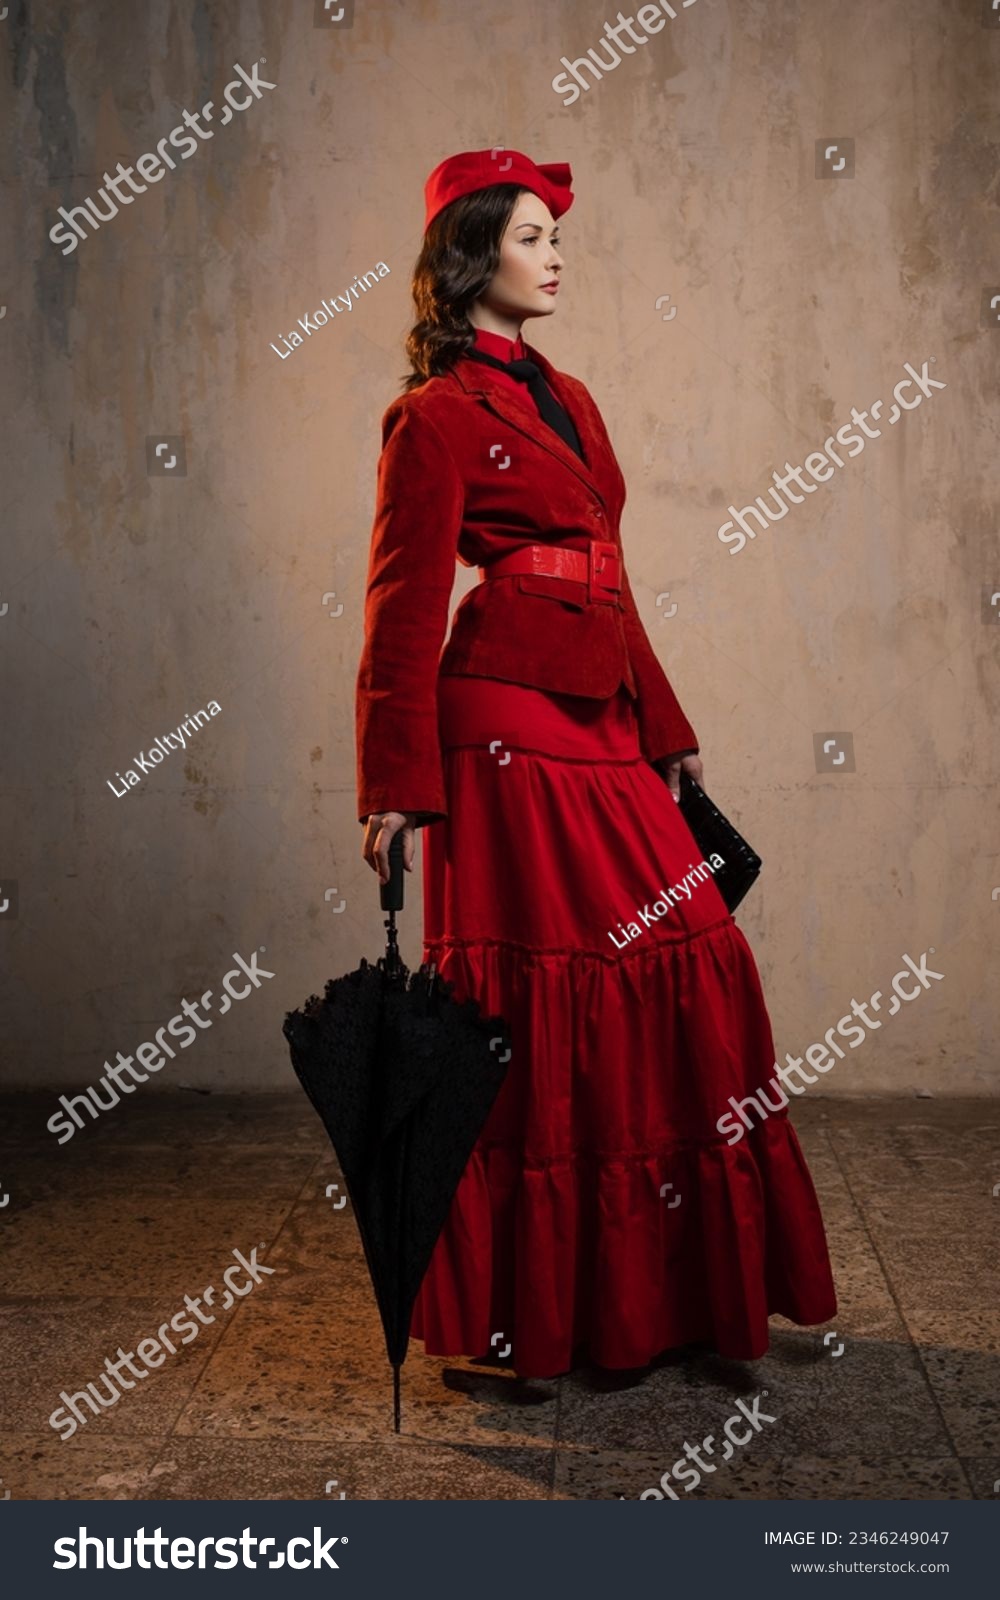 Mary Poppins. A stylish lady in a red old-fashioned suit with a hat and a lace umbrella #2346249047